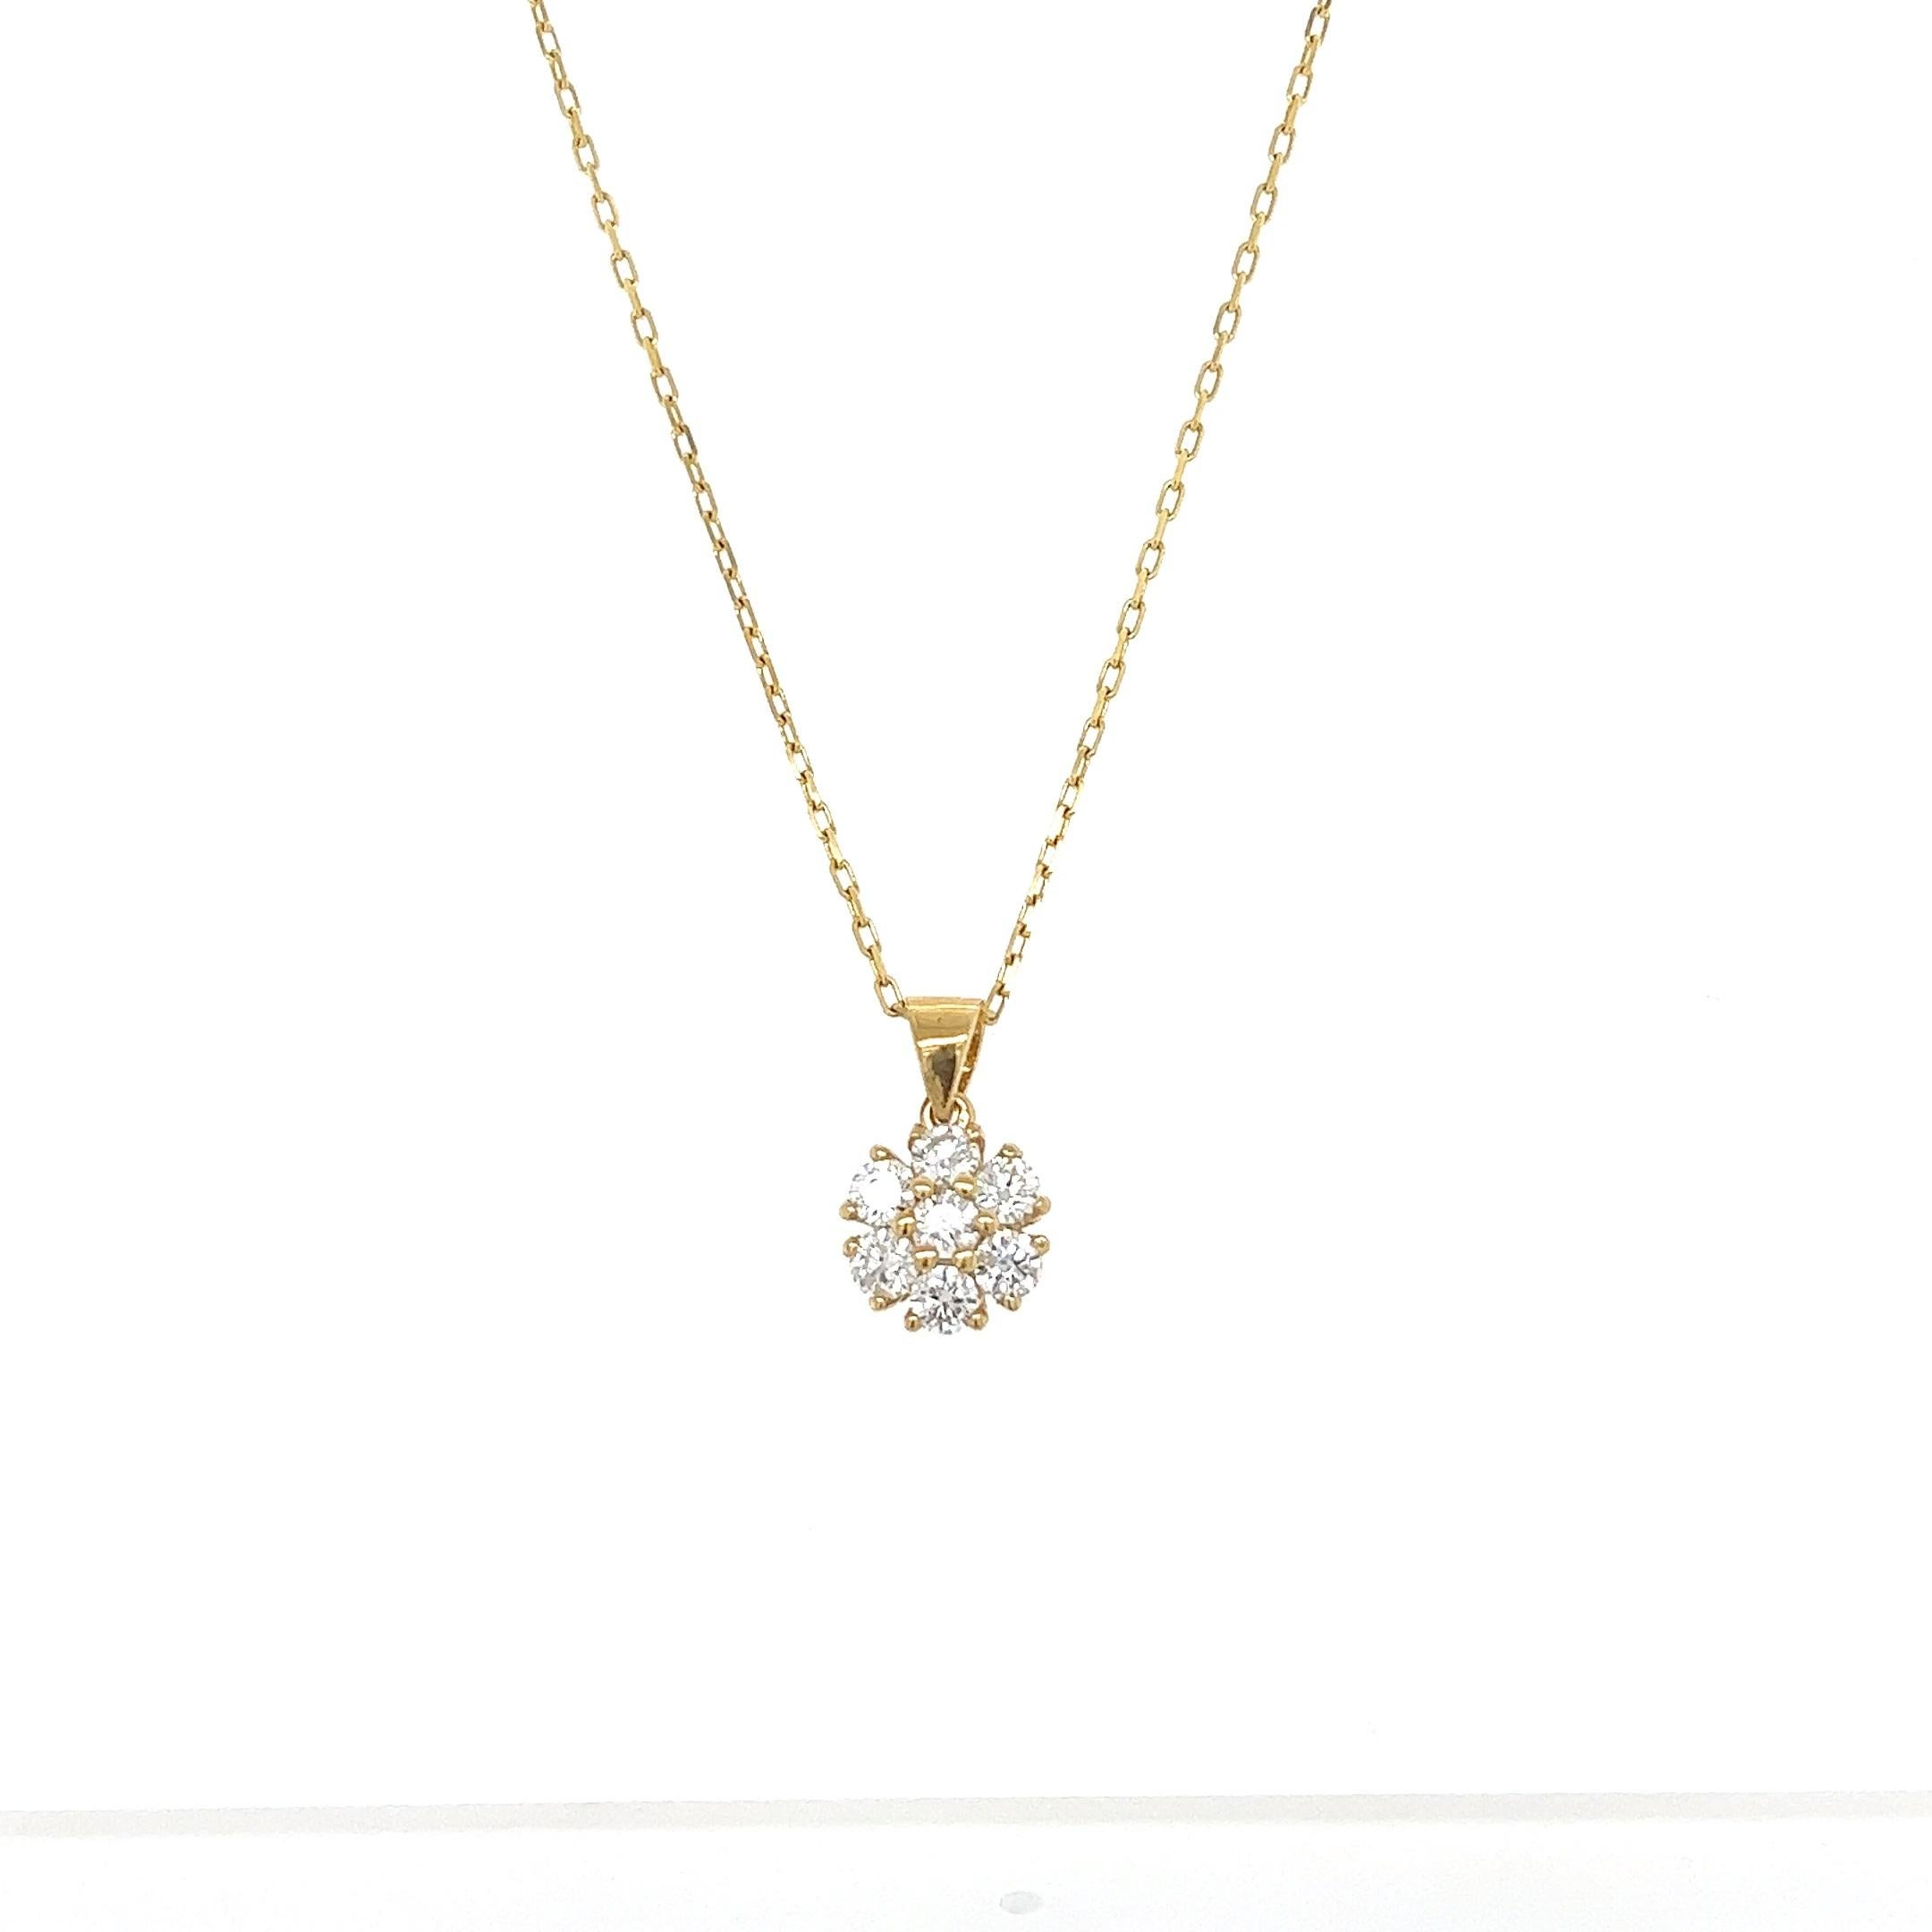 This floret diamond pendant necklace has Natural Round Cut Diamonds that weigh 0.78 carats. The clarity and color of the necklace are SI-F.

The approximate weight of this necklace is 2.5 grams. 

The necklace is 17 inches long. 